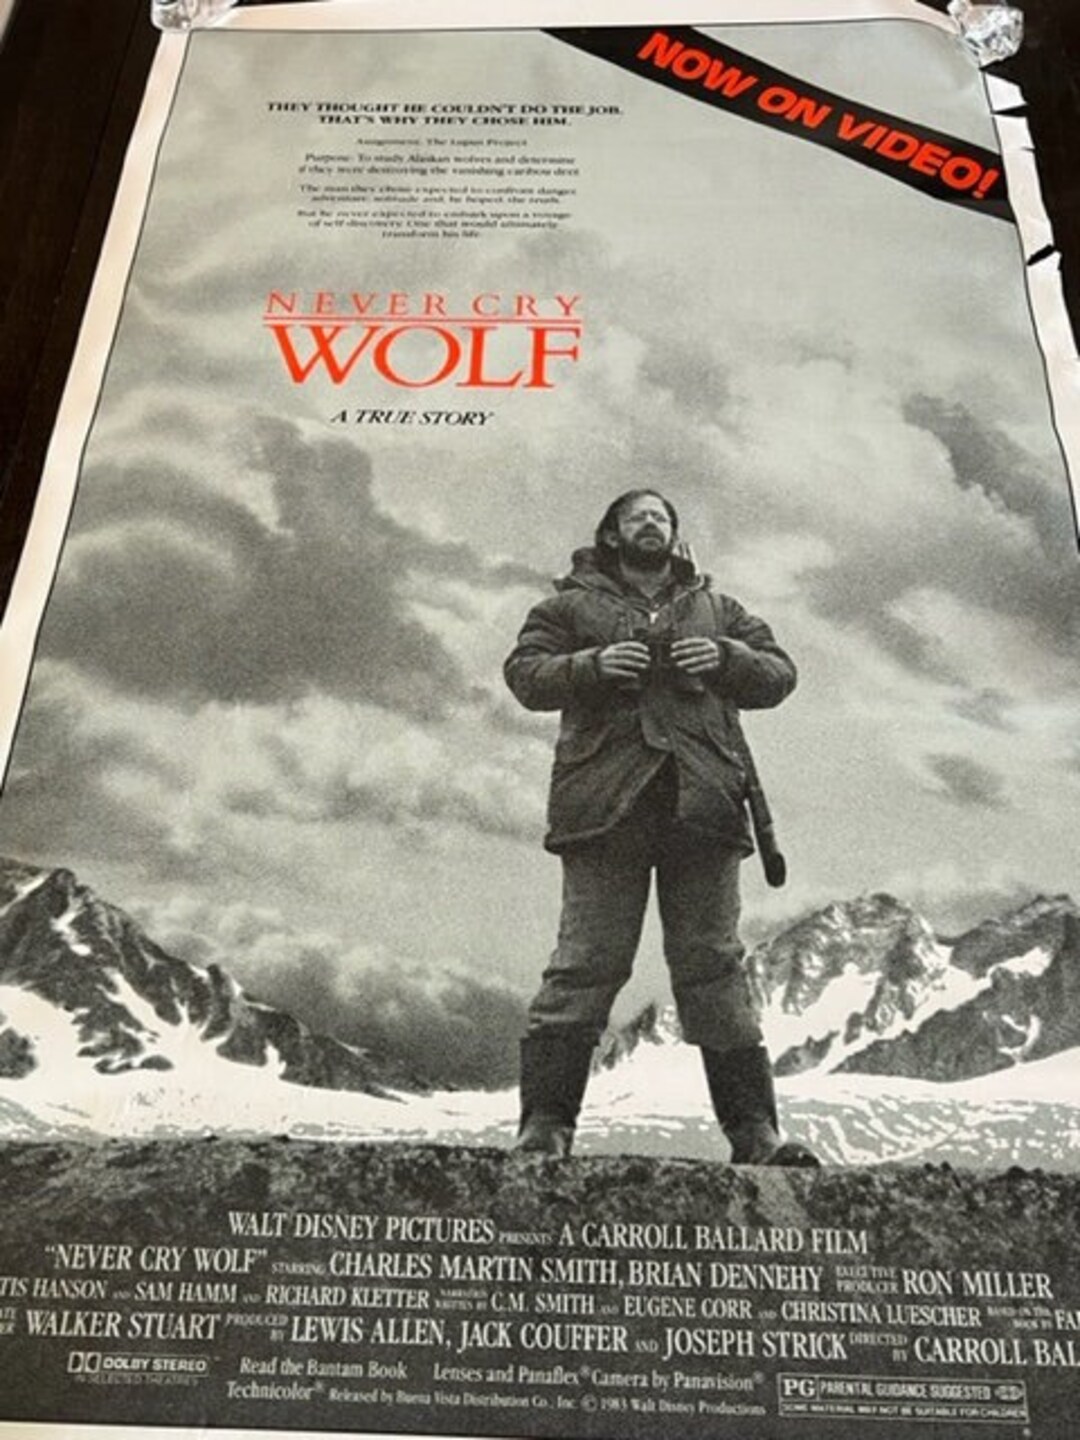 Movie Theater Cinema Poster Lobby Card 1983 Never Cry Wolf - Etsy 日本